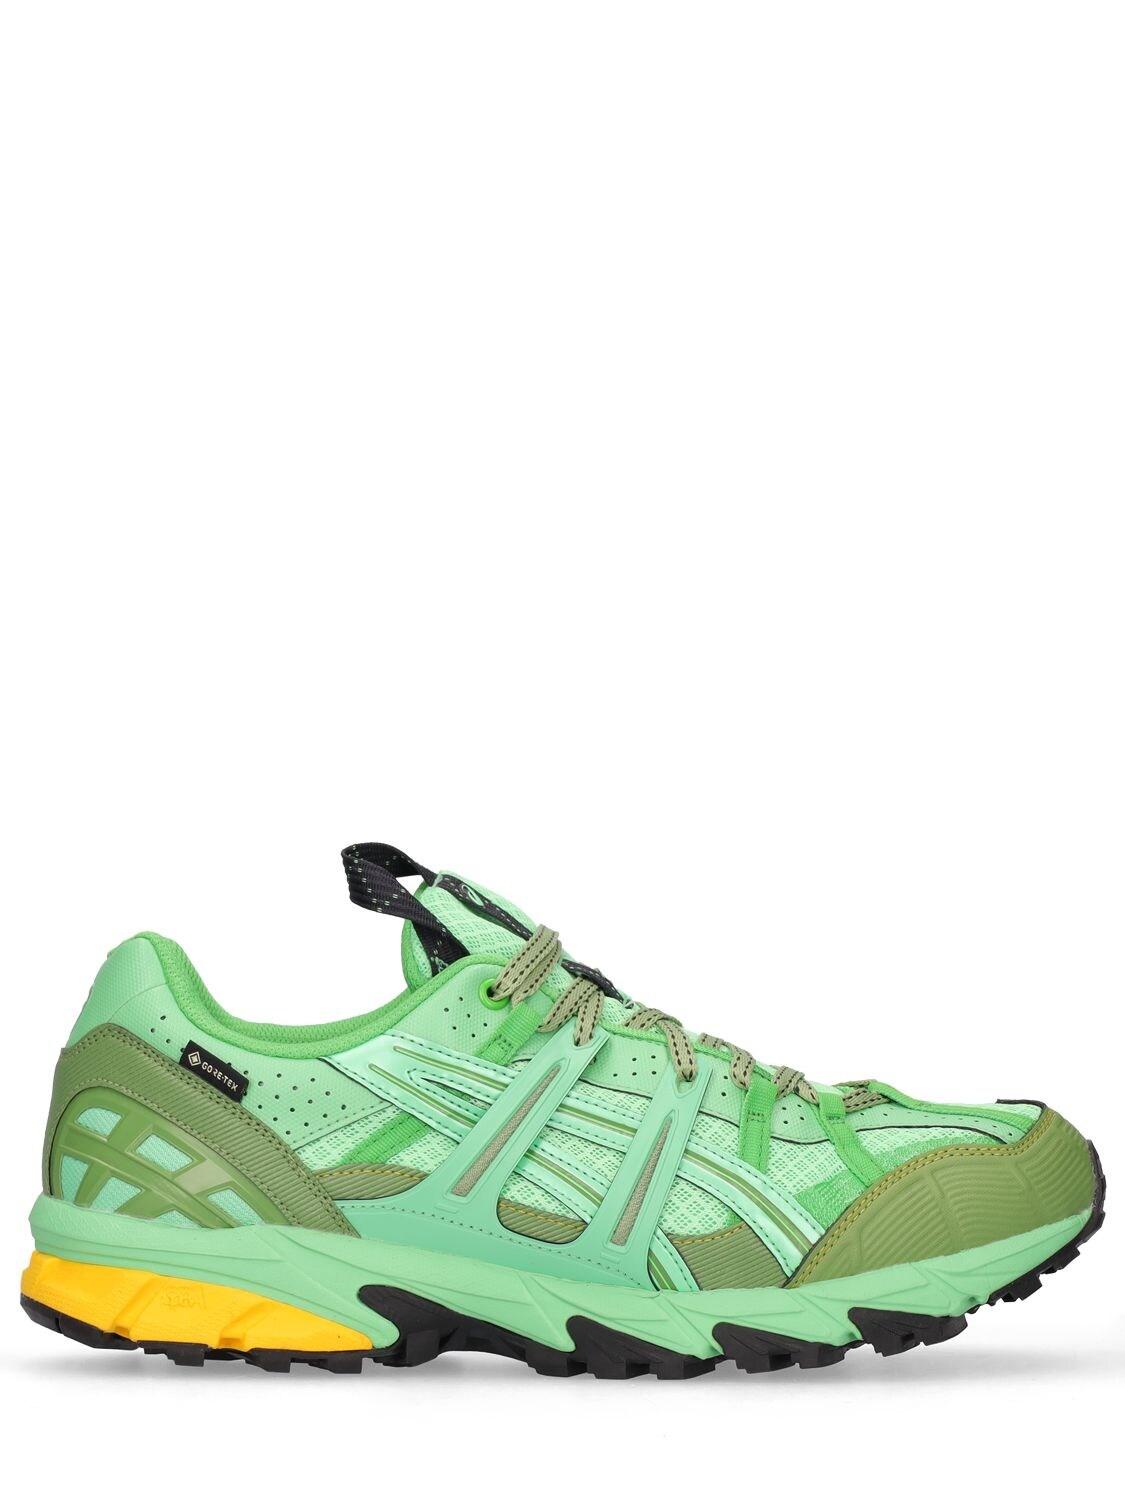 Asics Rubber Hs4-s Gel-sonoma 15-50 Gtx Sneakers in Green for Men - Save  26% | Lyst